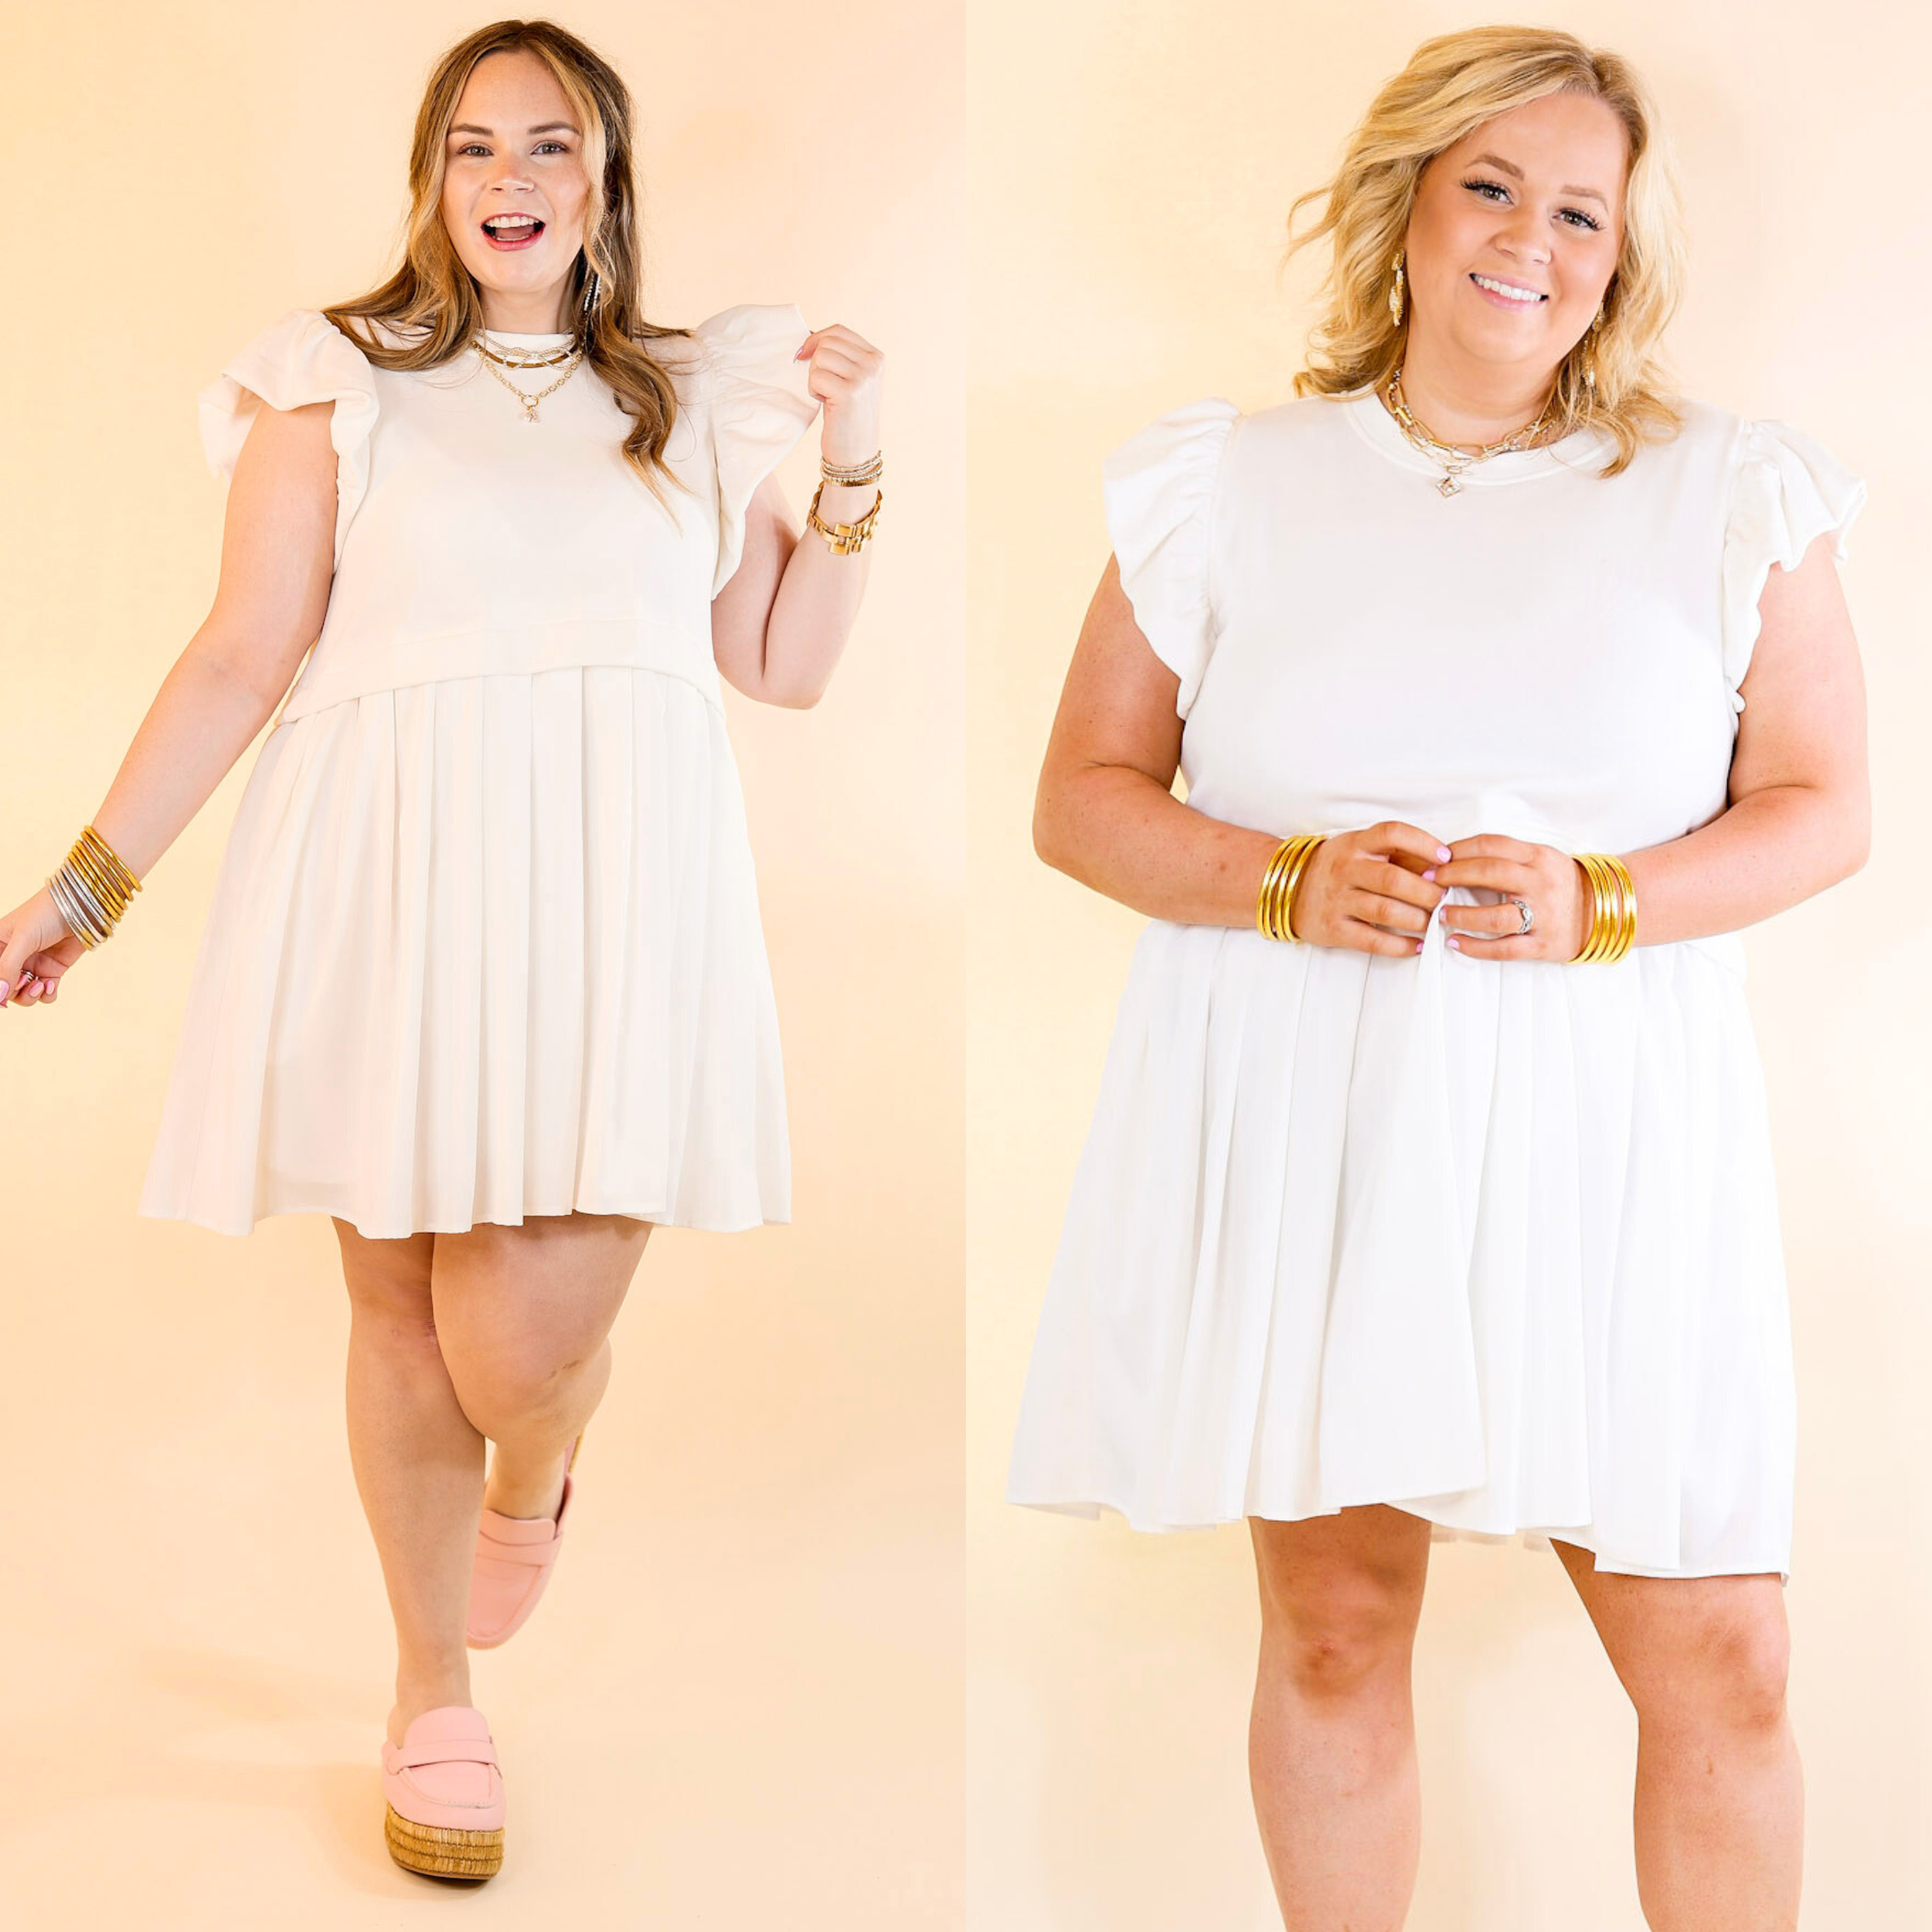 Simple Sophistication Solid Color Dress with Ruffle Cap Sleeves in Off White - Giddy Up Glamour Boutique